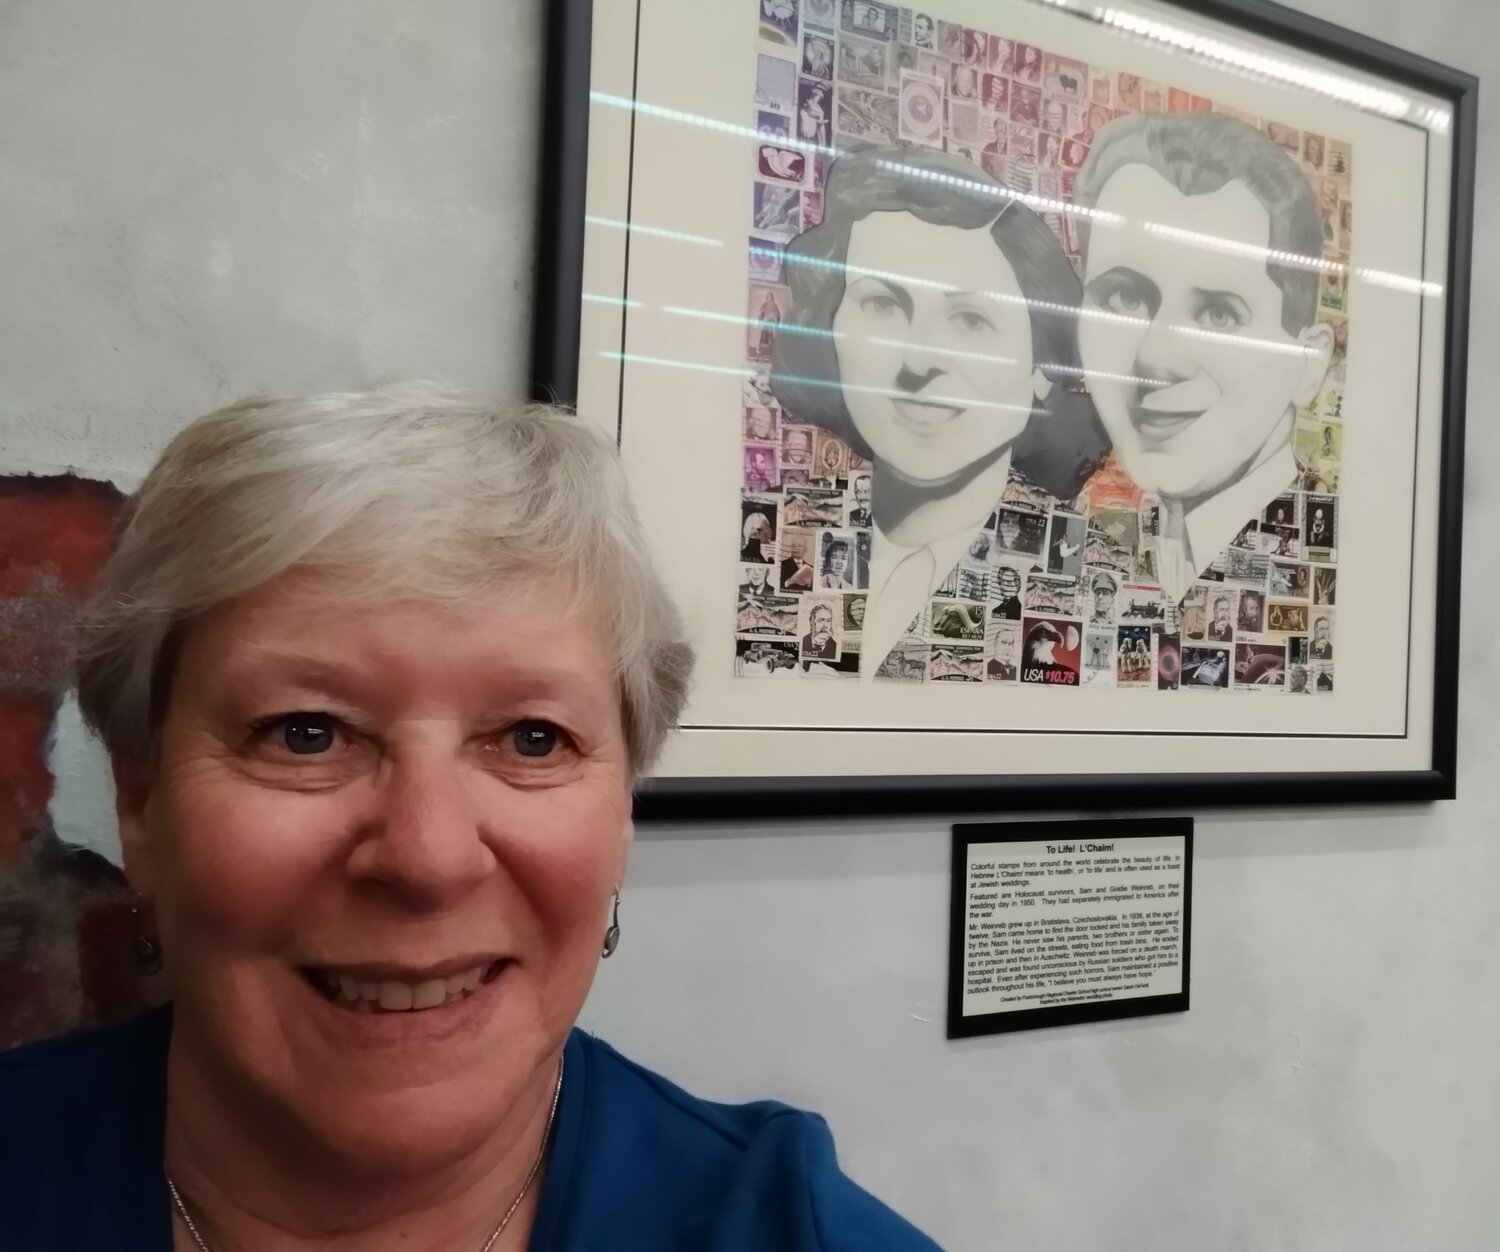 Charlotte Sheer took this selfie in front of one of the 18 collages made from some of the 11 million stamps collected as part of the Holocaust Stamps Project that’s part of the exhibit at the American Philatelic Center called “A Philatelic Memorial of the Holocaust.” “L’Chaim – To Life!” celebrates Holocaust survivors Sam and Goldie Weinreb.